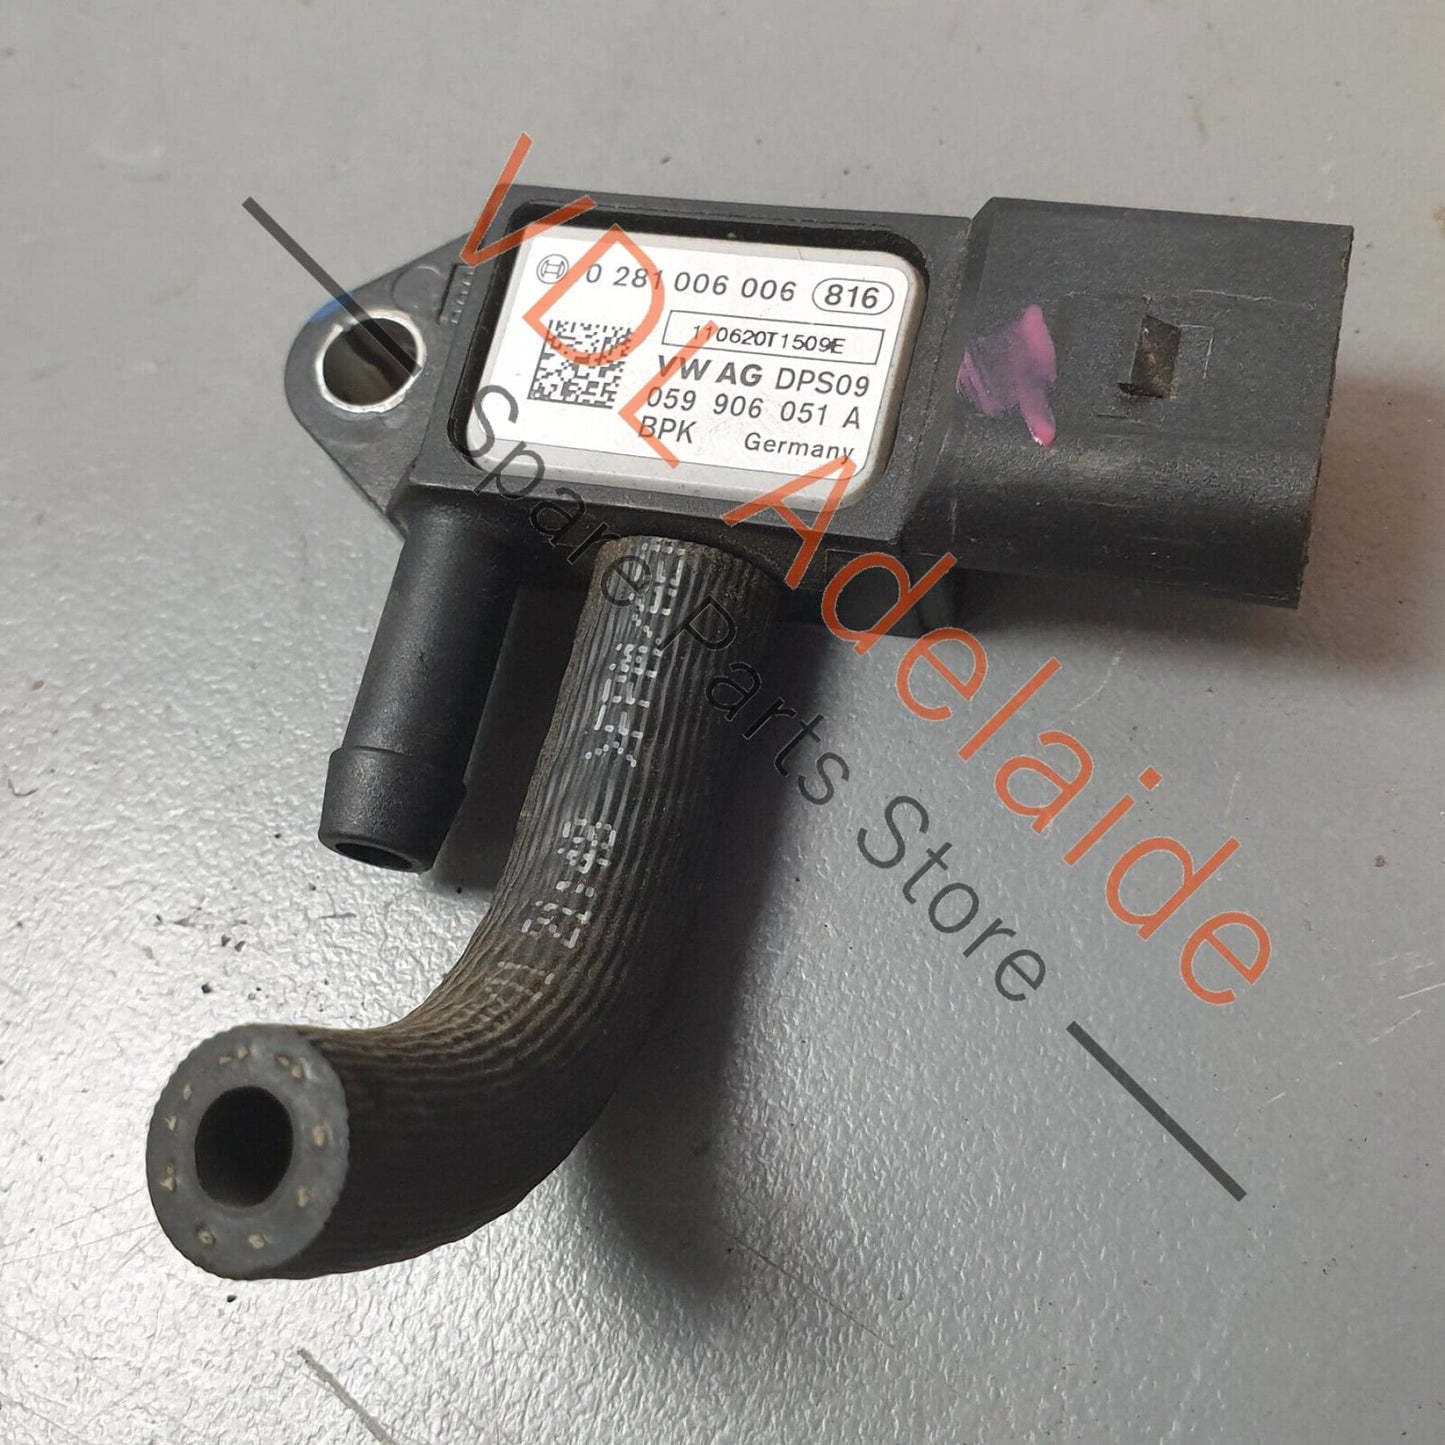 Audi Q7 6.0L V12 4L Exhaust Gas Pressure Difference Sender for DPF 059906051A 059906051A